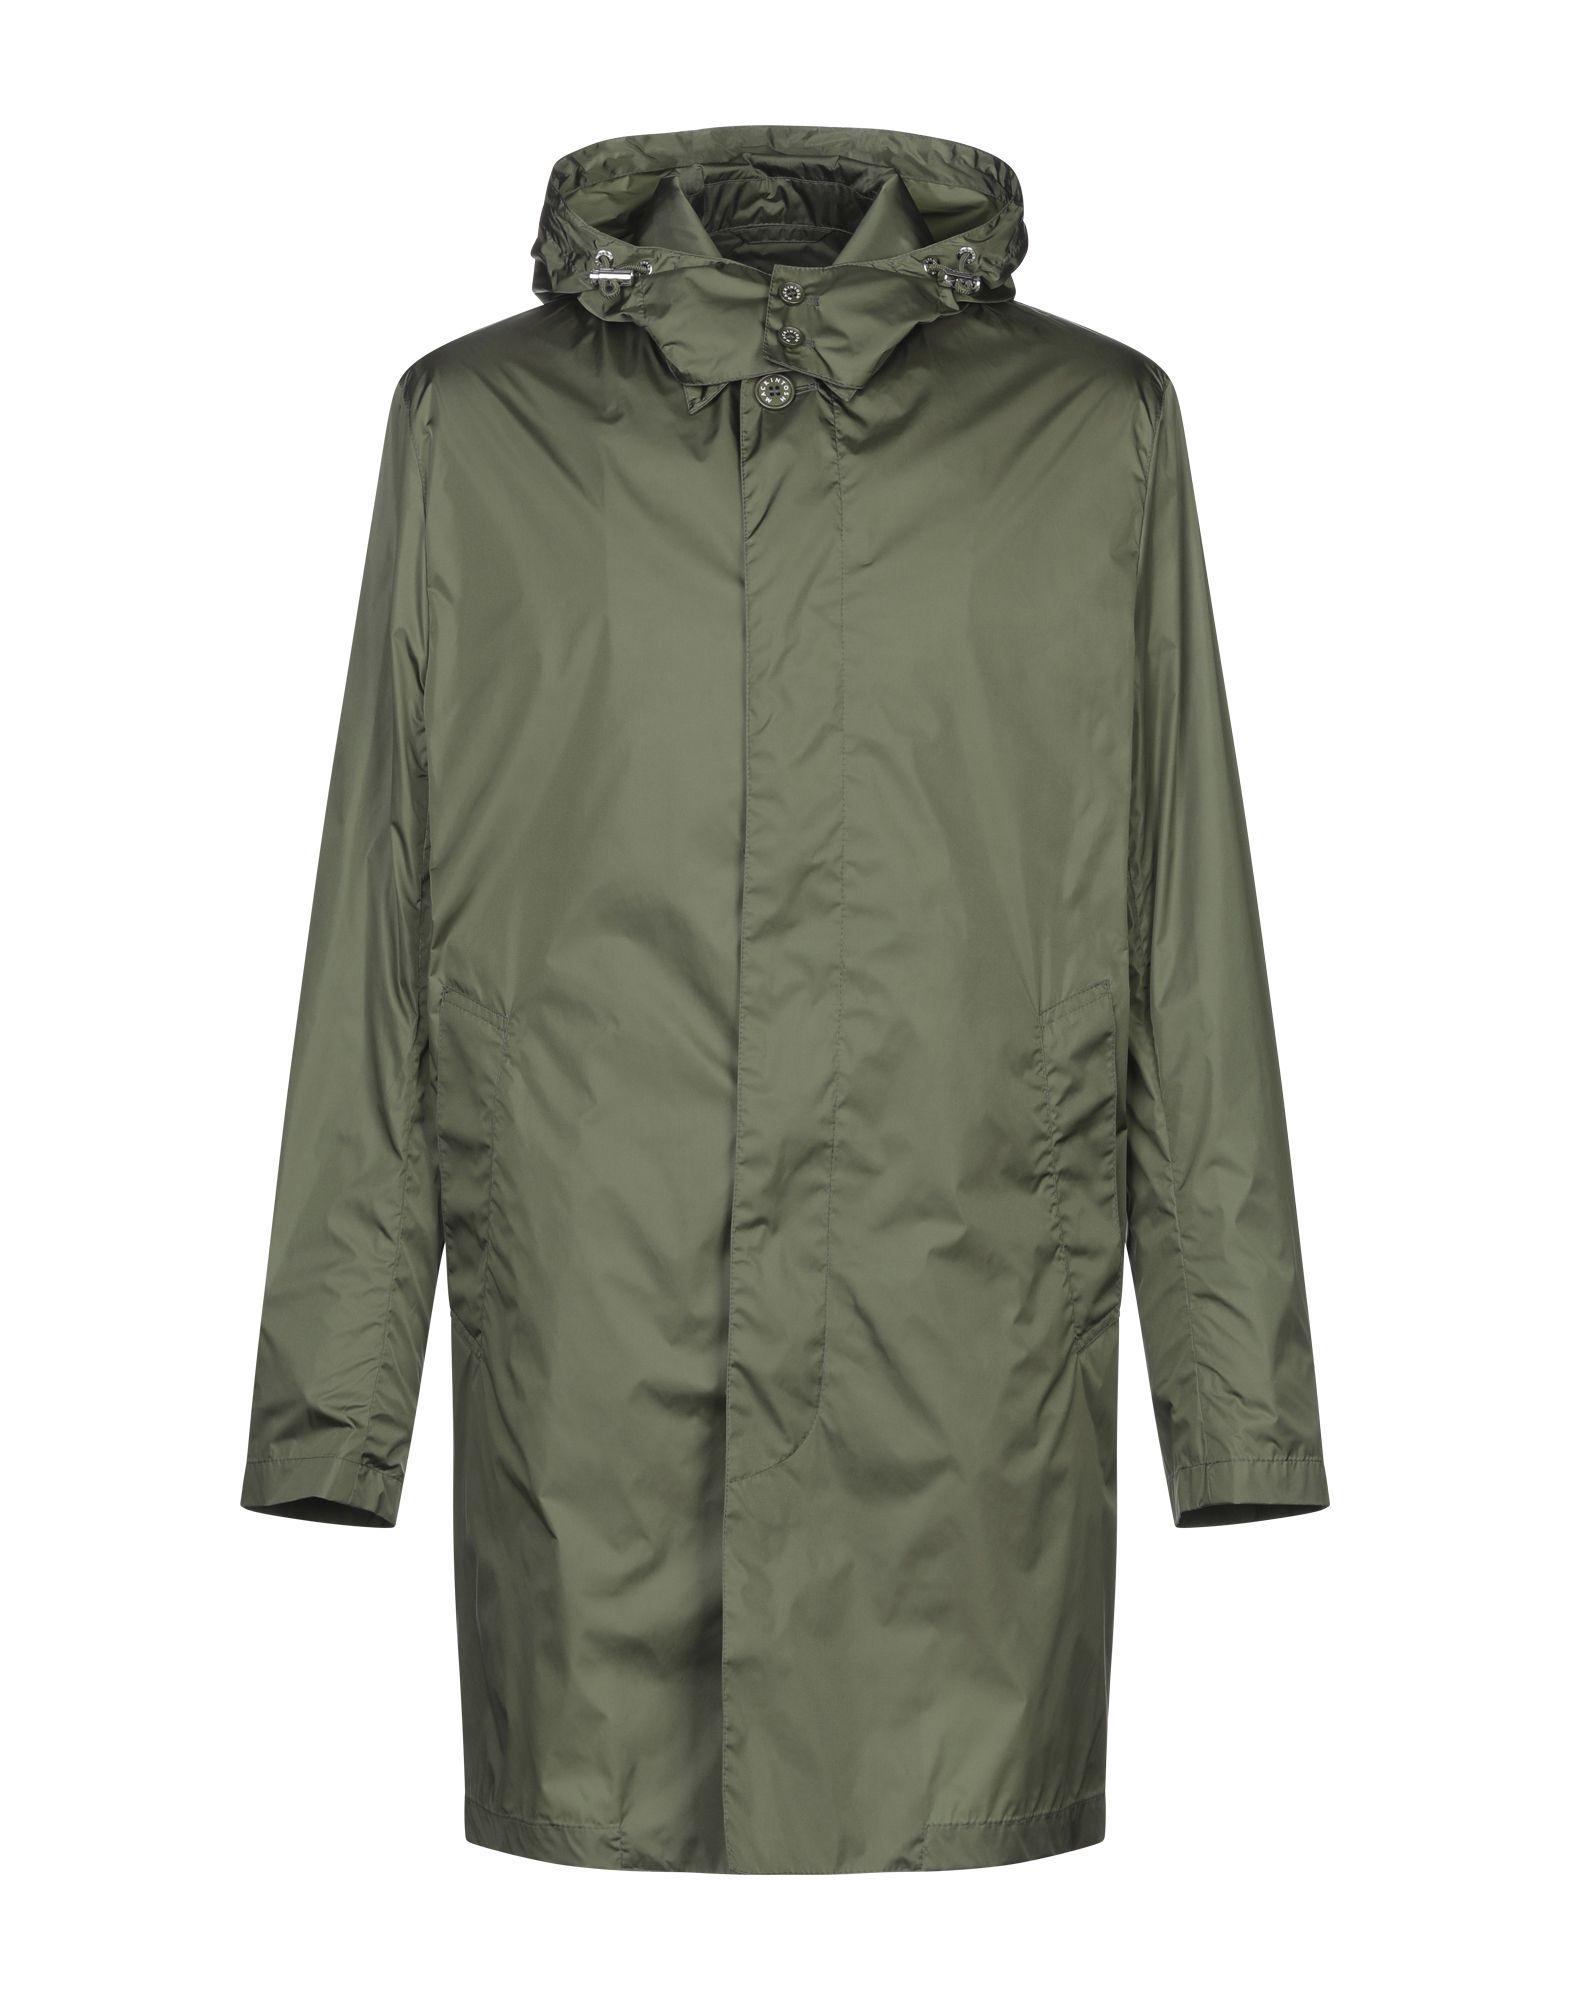 Mackintosh Cotton Overcoat in Military Green (Green) for Men - Lyst